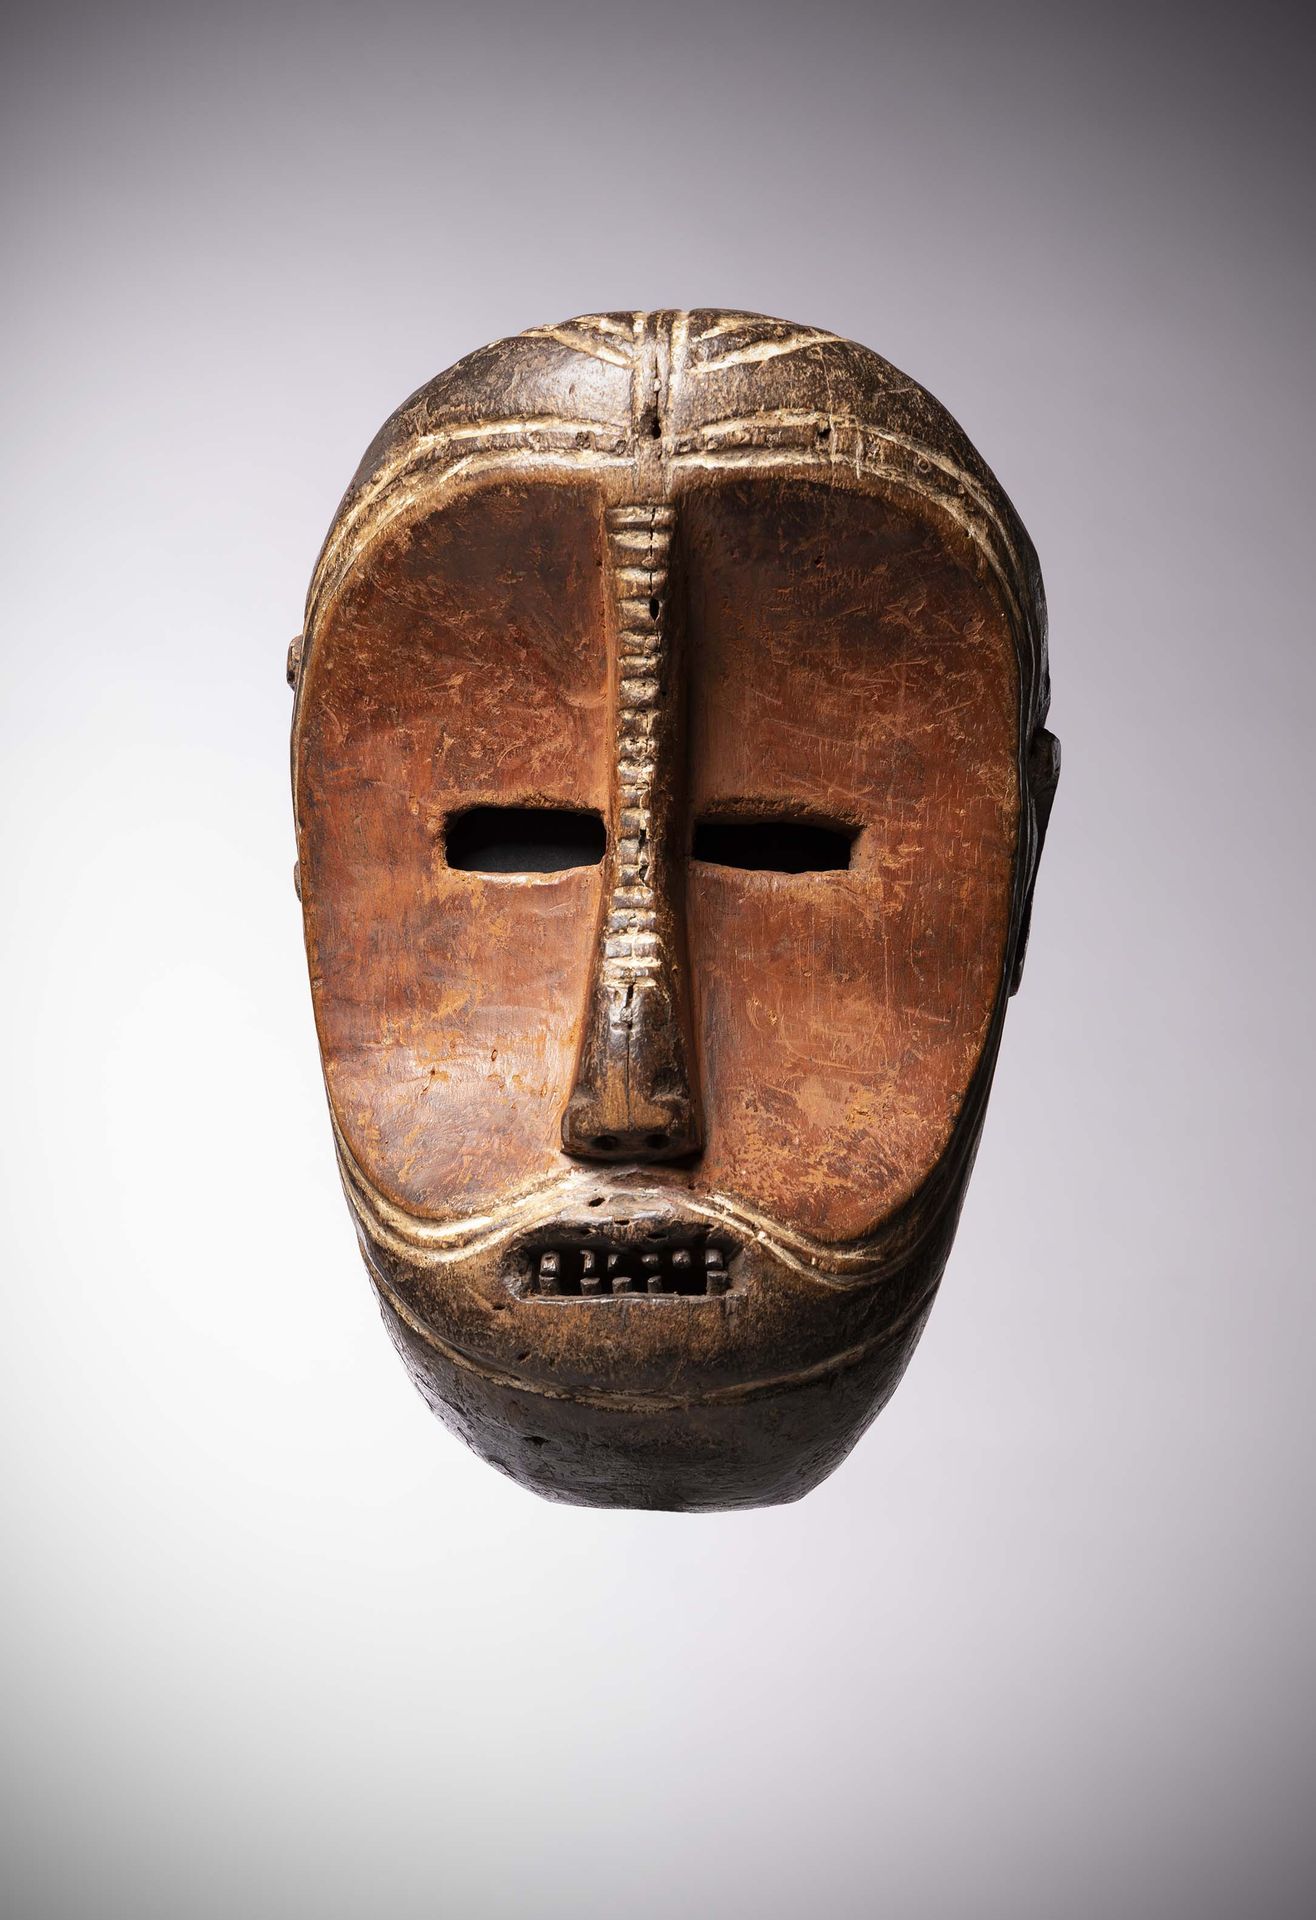 Null Bwaka

(DRC) Very old concave face mask coated with red ochre ngula and hig&hellip;